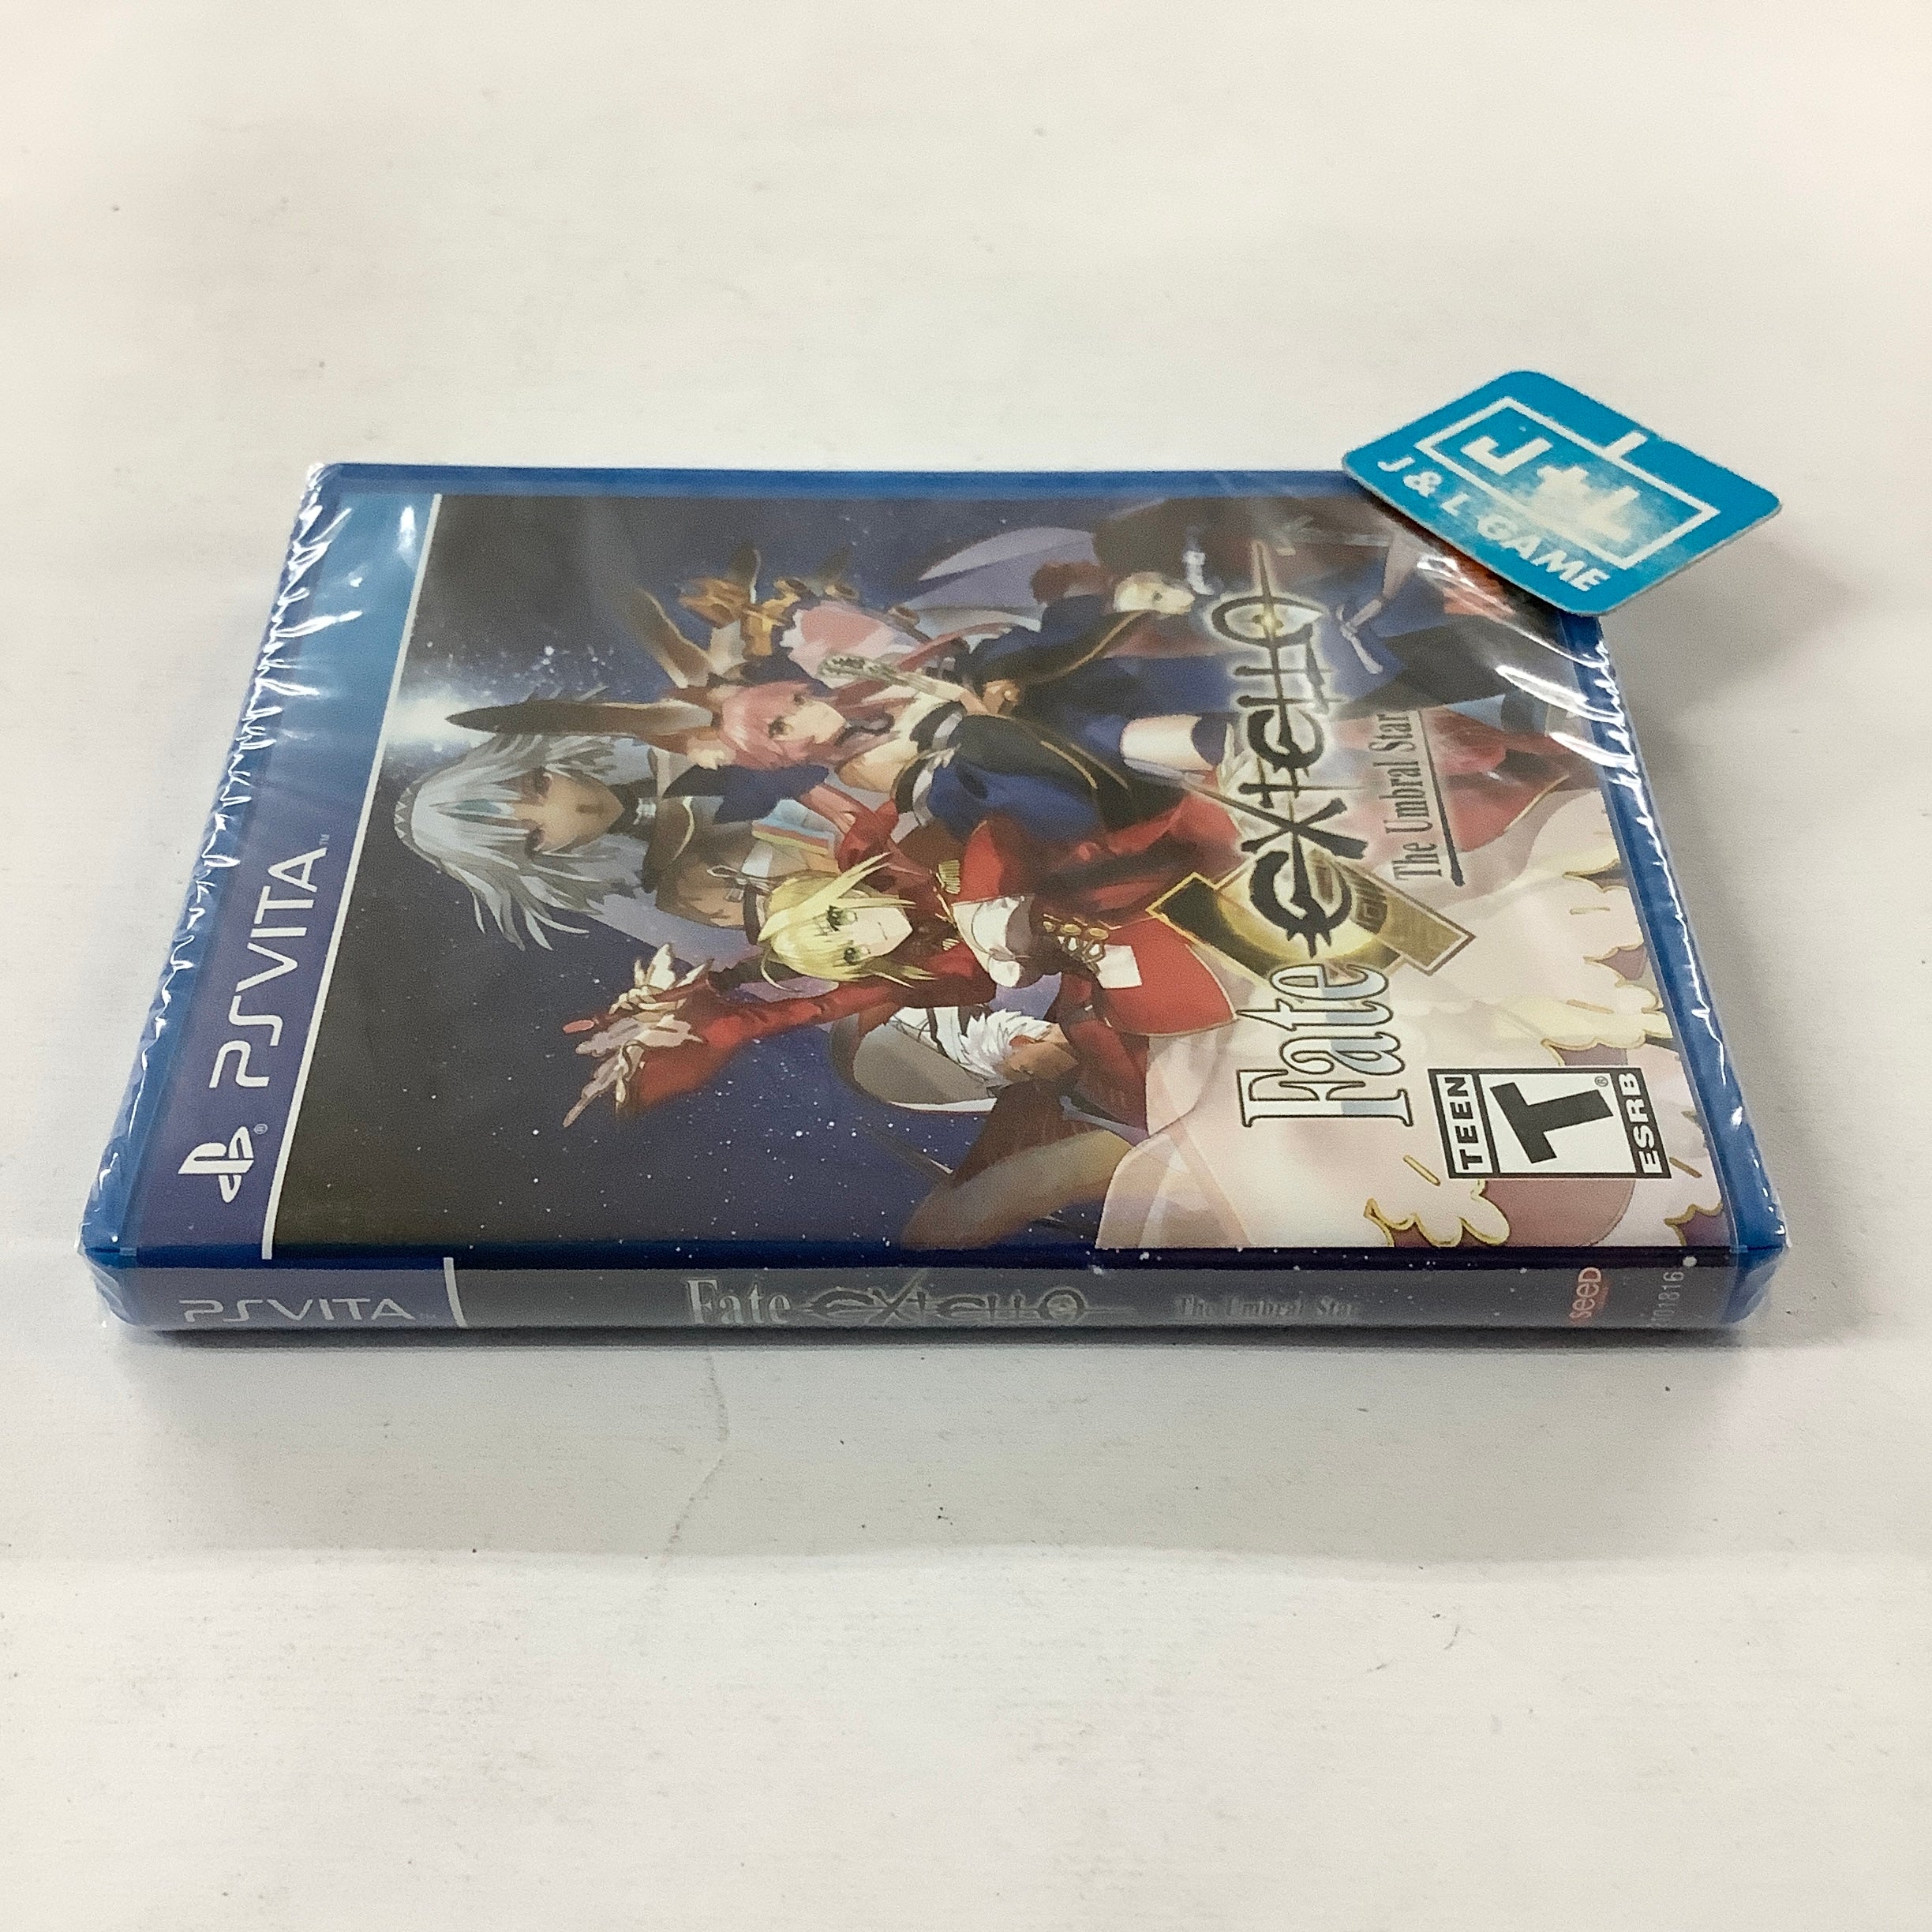 Fate/Extella: The Umbral Star - (PSV) PlayStation Vita Video Games XSEED Games   